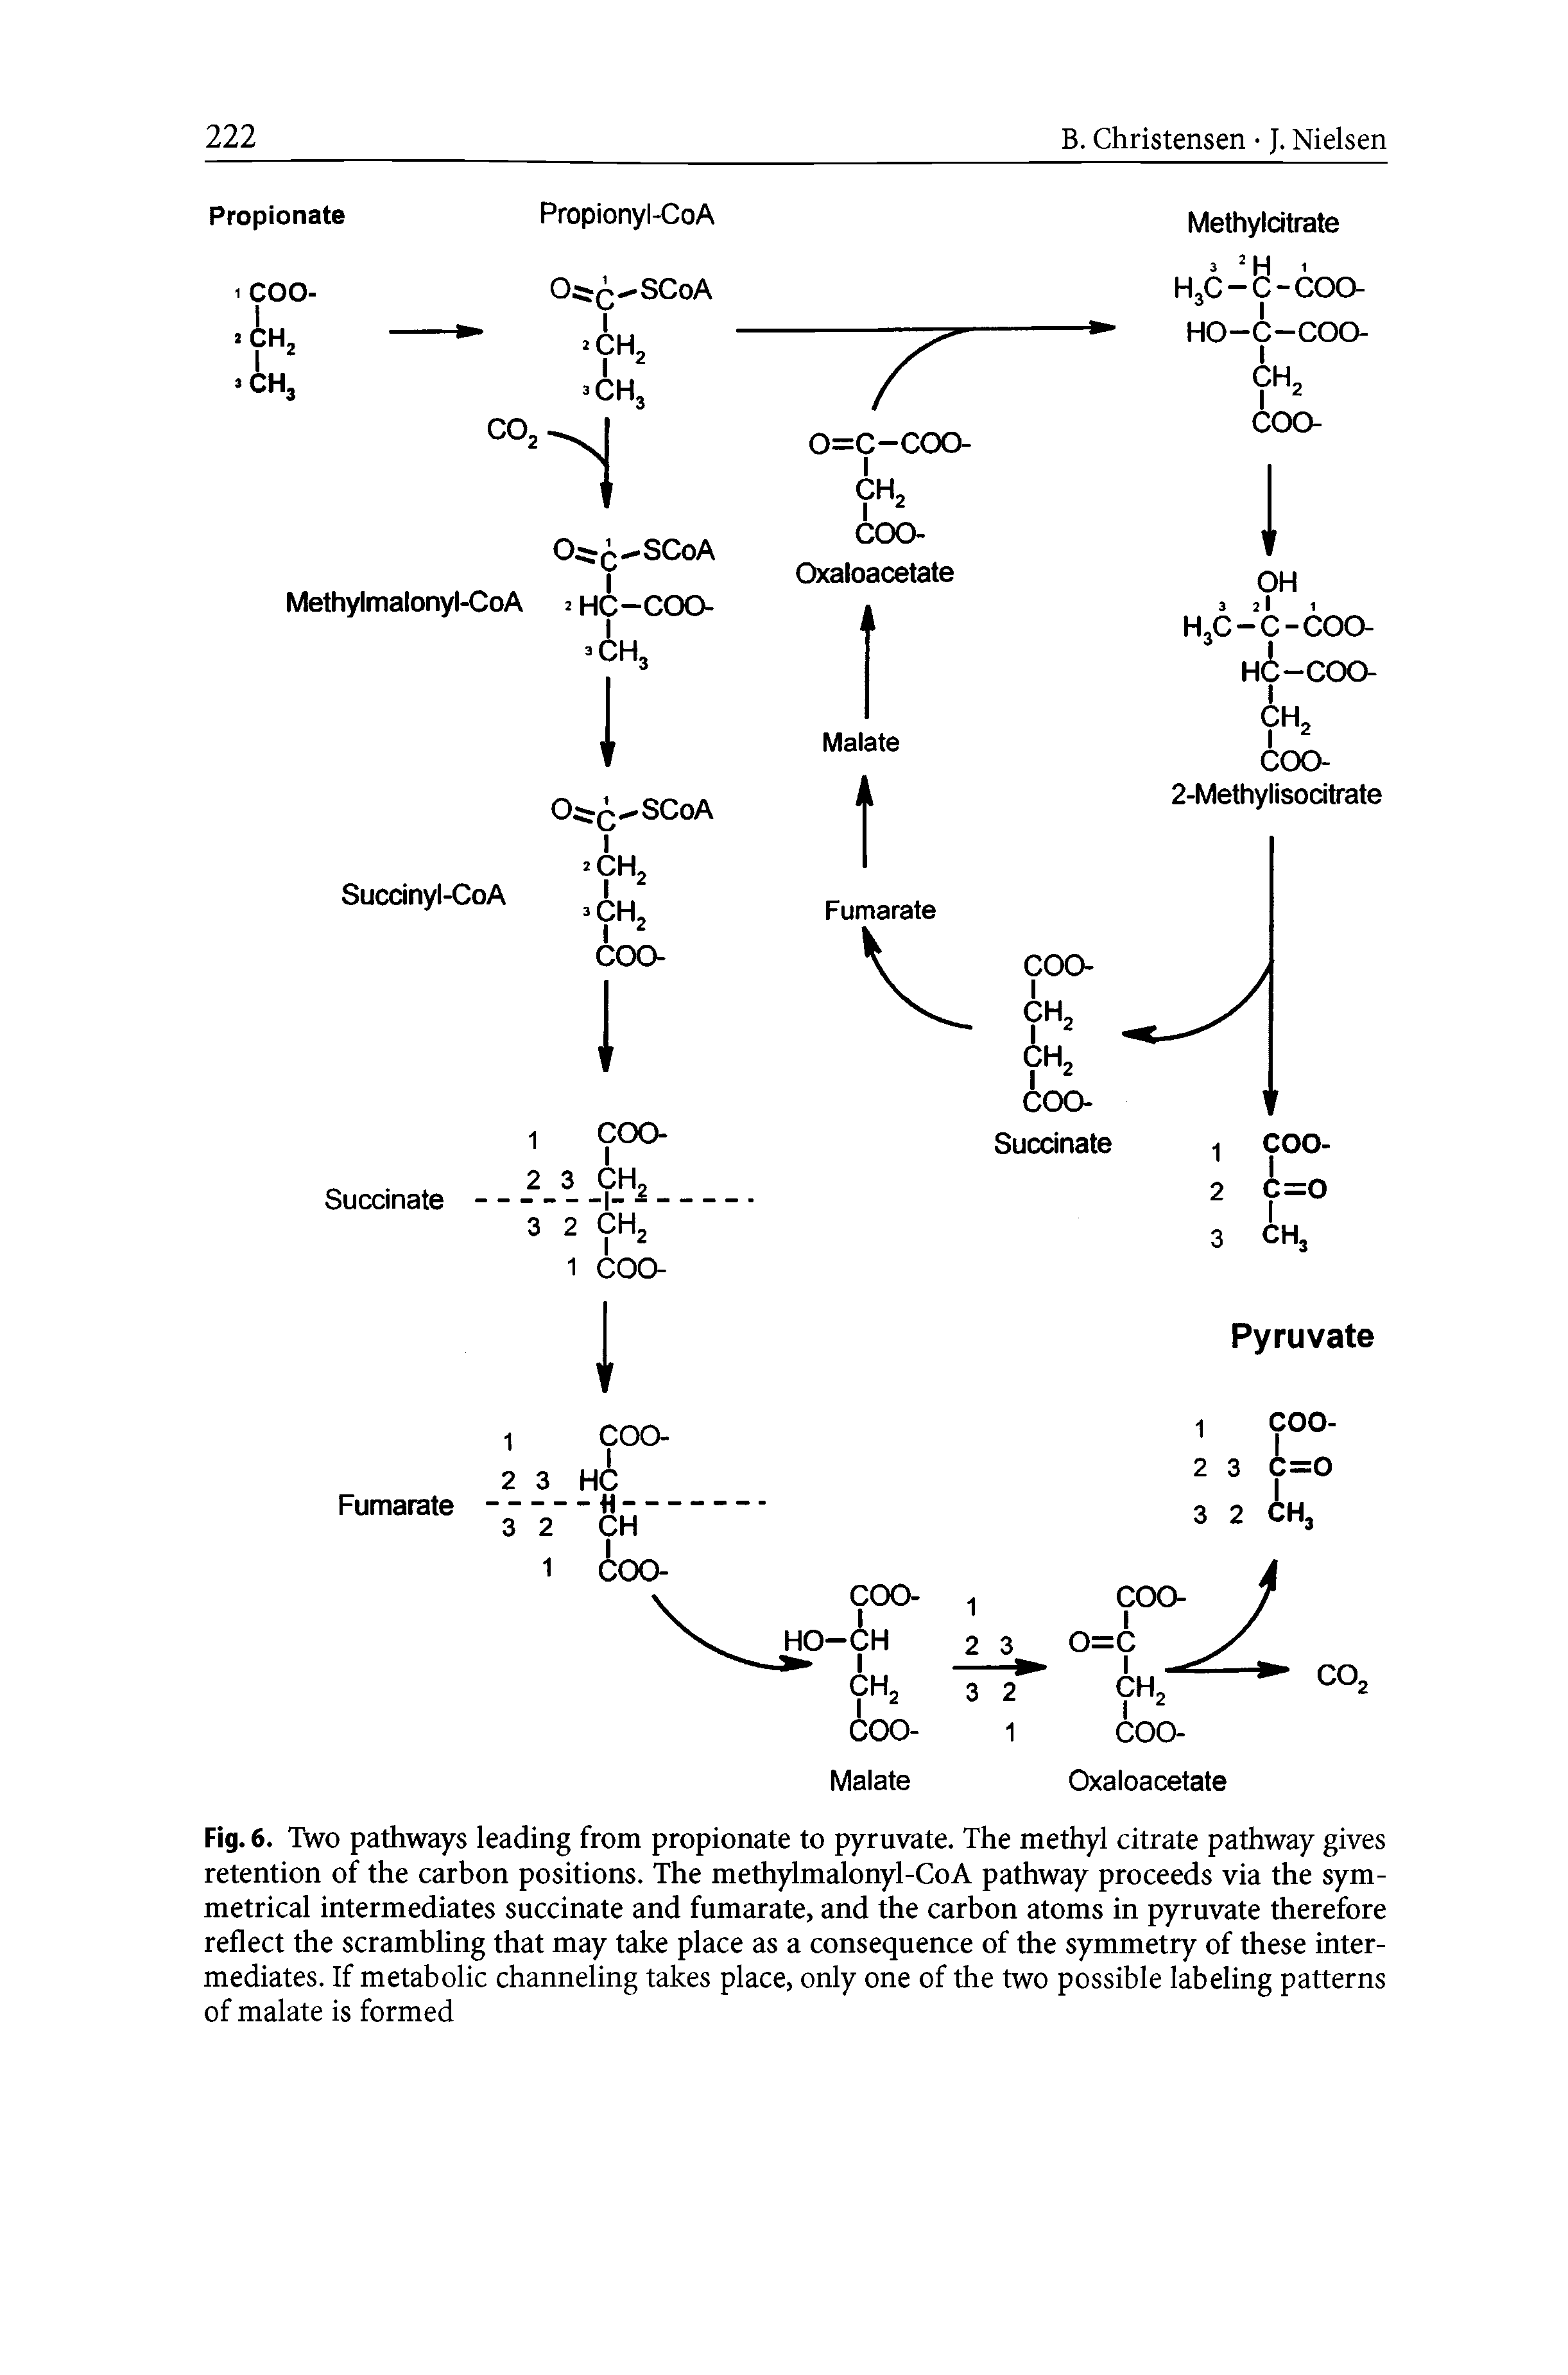 Fig. 6. Two pathways leading from propionate to pyruvate. The methyl citrate pathway gives retention of the carbon positions. The methylmalonyl-CoA pathway proceeds via the symmetrical intermediates succinate and fumarate, and the carbon atoms in pyruvate therefore reflect the scrambling that may take place as a consequence of the symmetry of these intermediates. If metabolic channeling takes place, only one of the two possible labeling patterns of malate is formed...